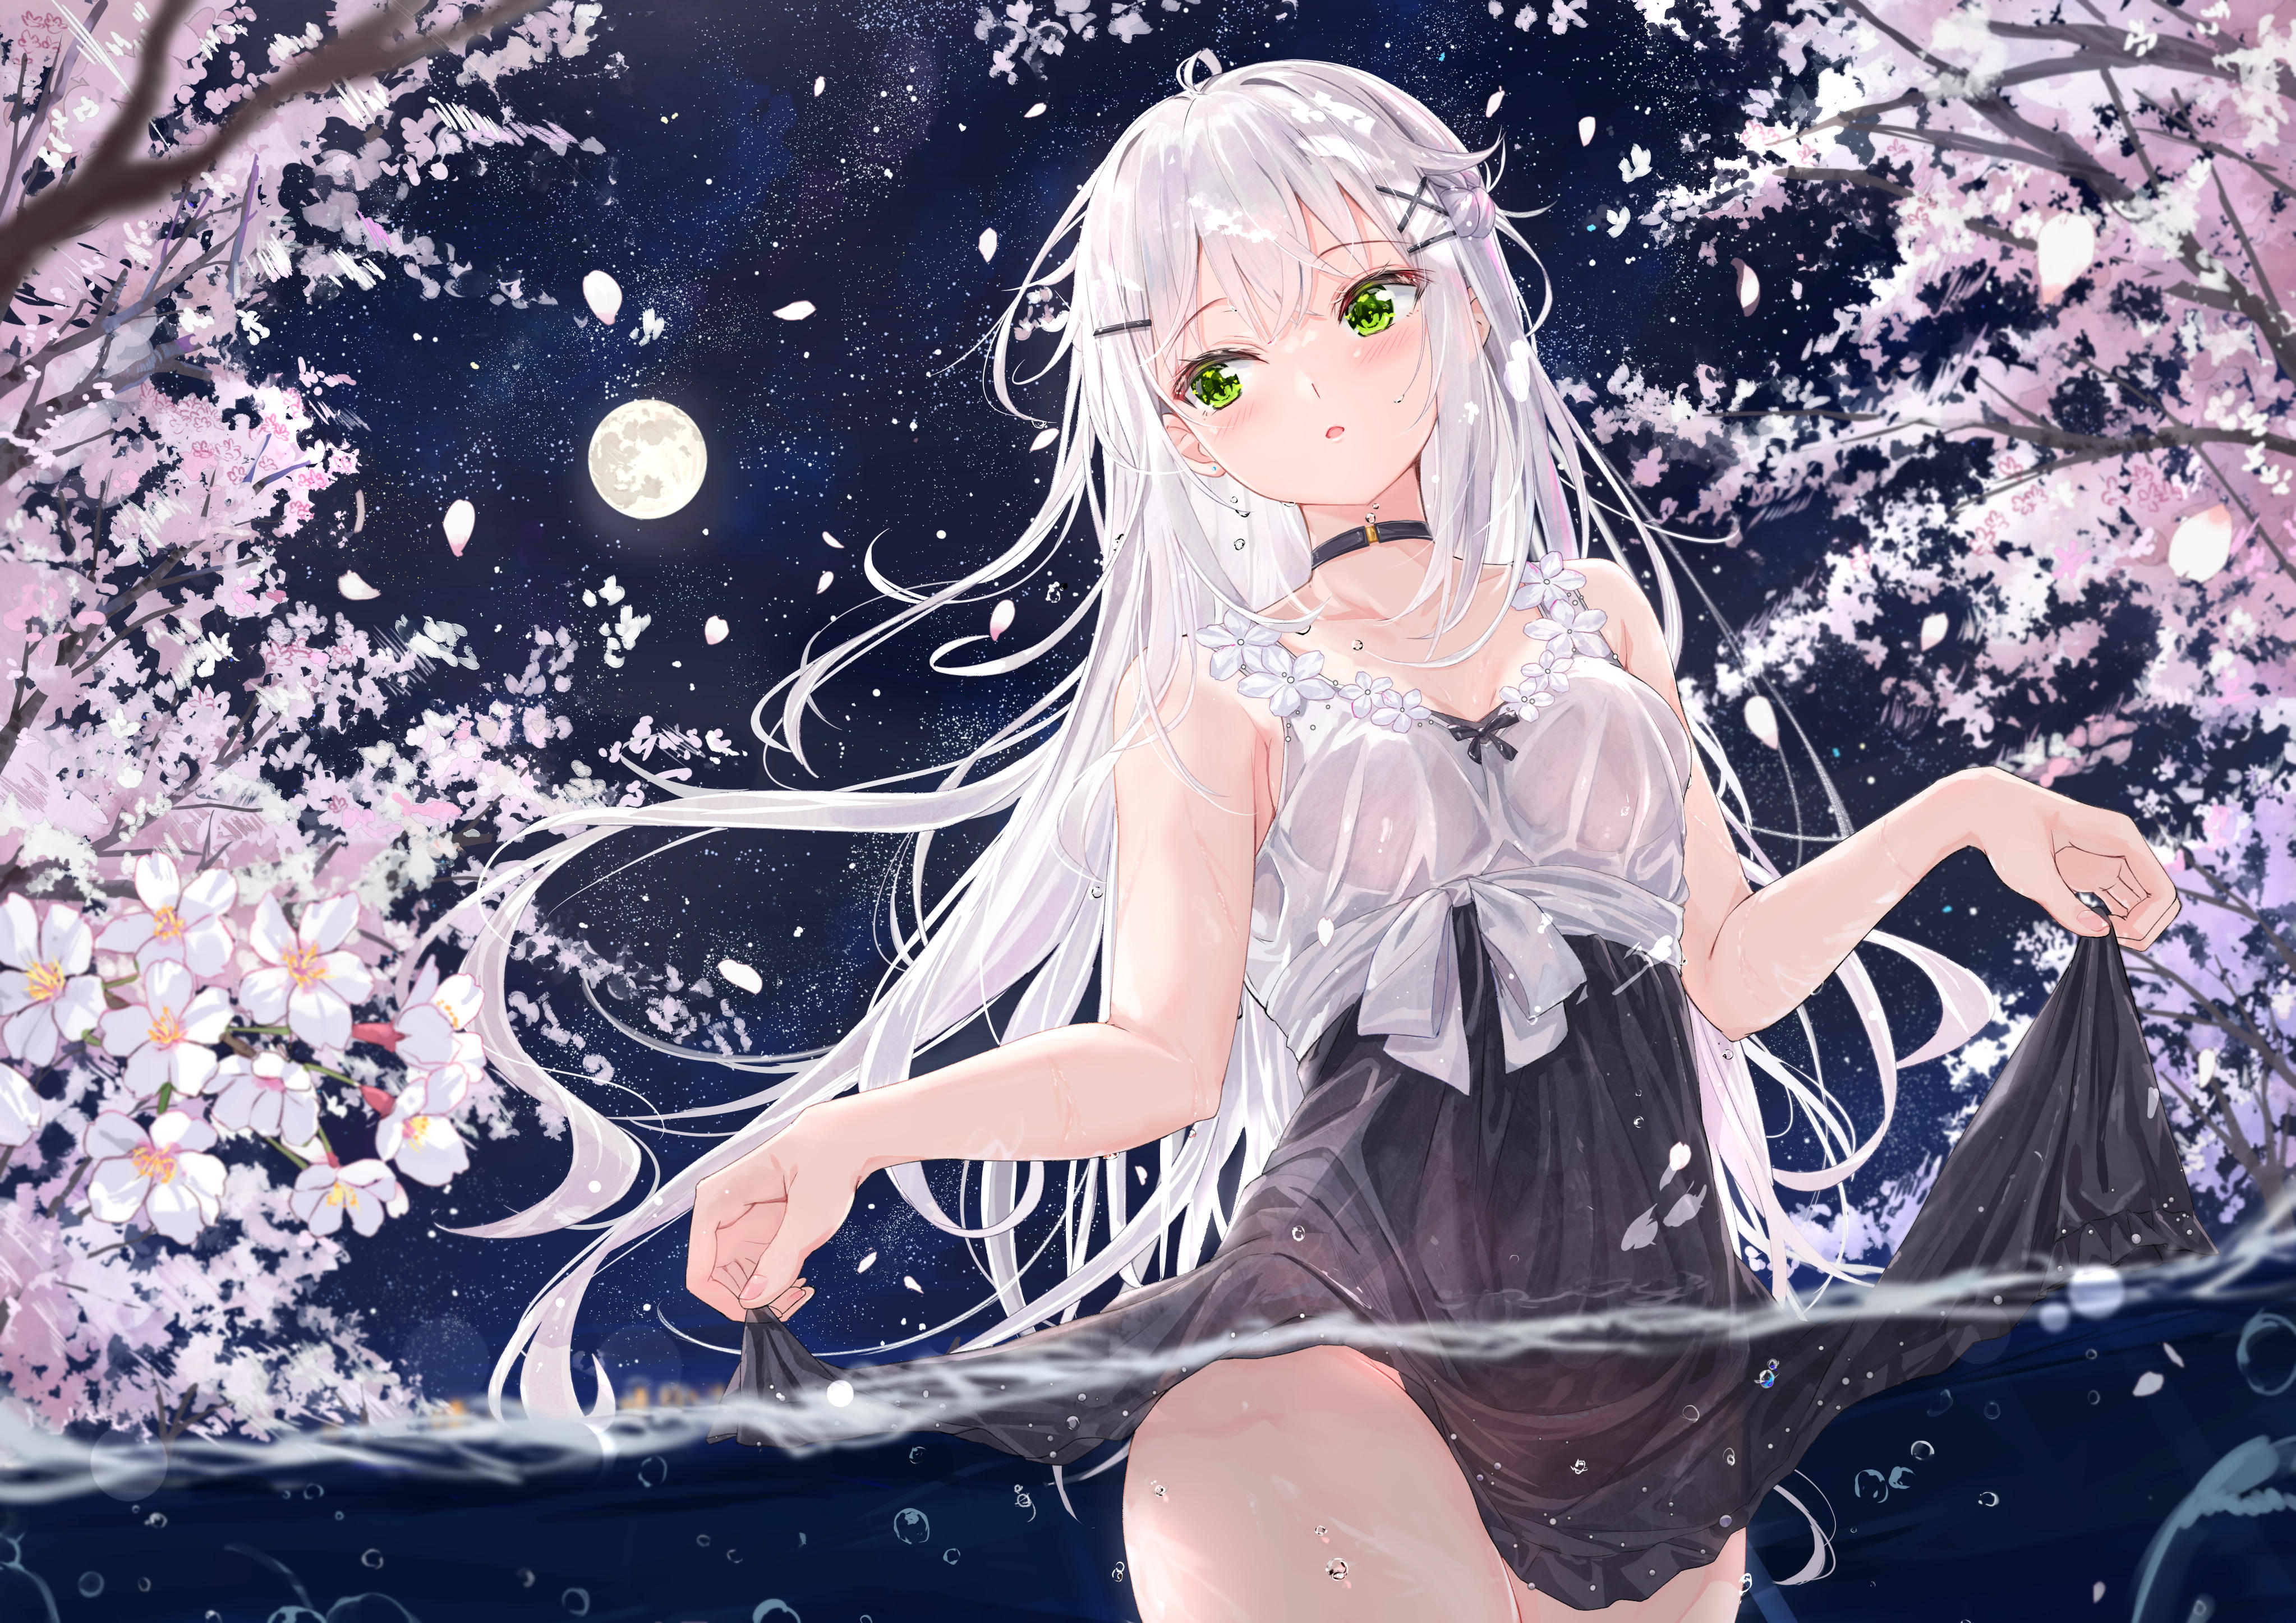 Anime 4093x2894 white hair green eyes anime anime girls Moon flowers cherry trees in water water cherry blossom dress wet artwork Na Kyo standing in water